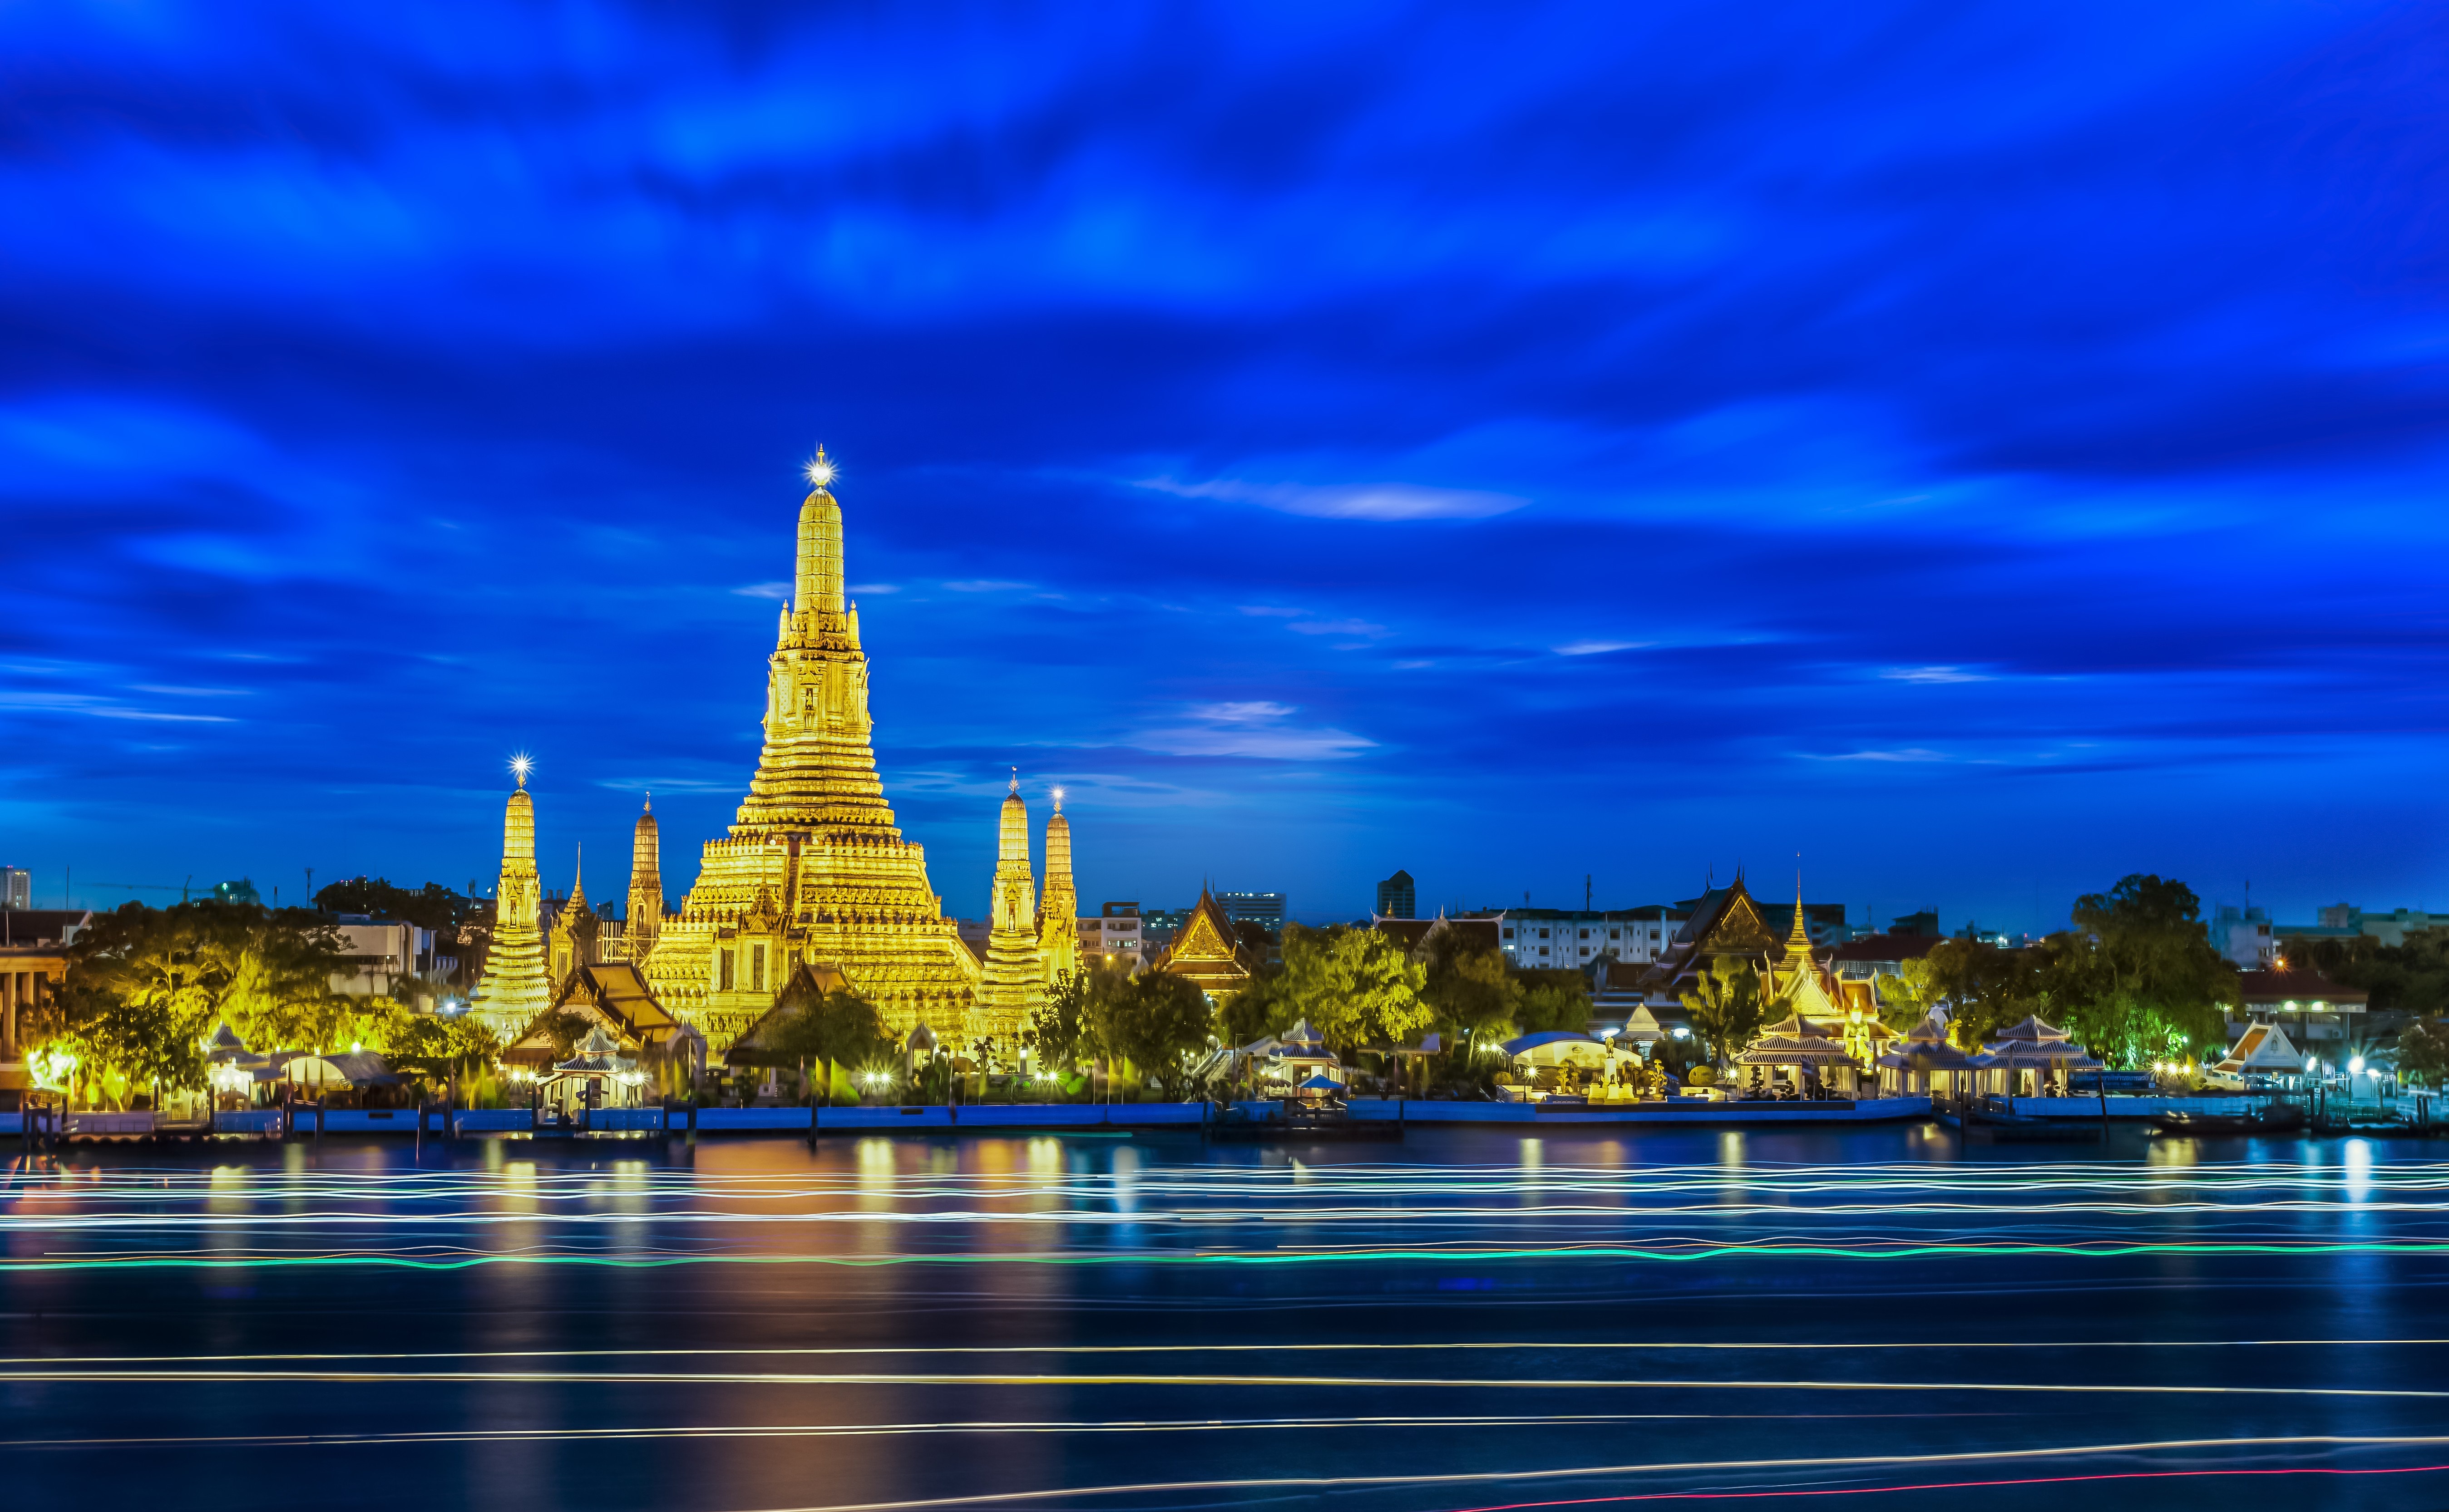 Thailand Background Images HD Pictures and Wallpaper For Free Download   Pngtree